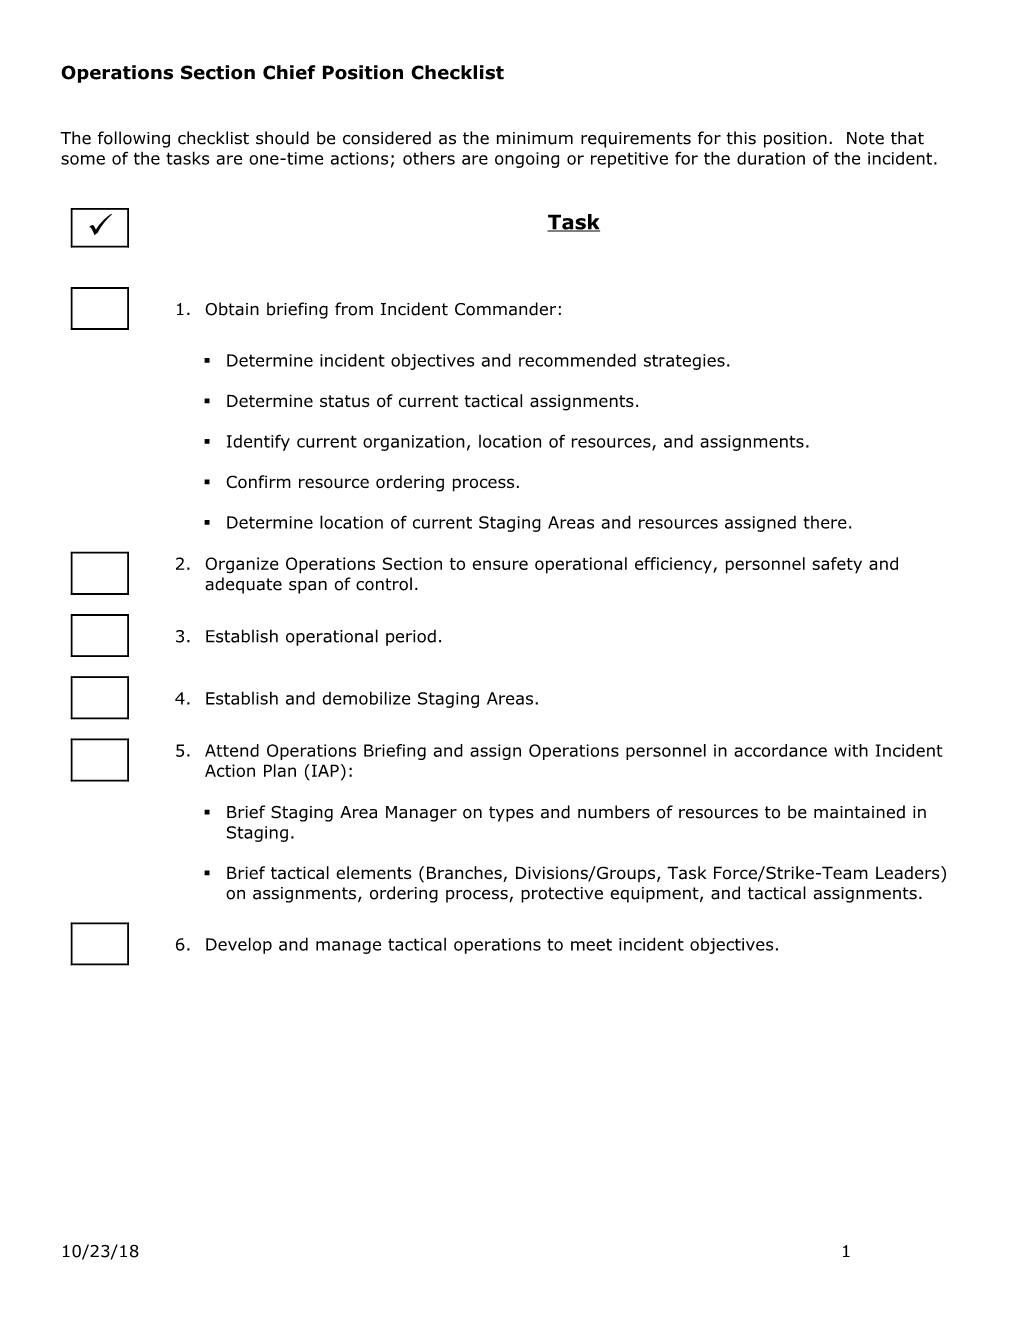 Operations Section Chief Position Checklist